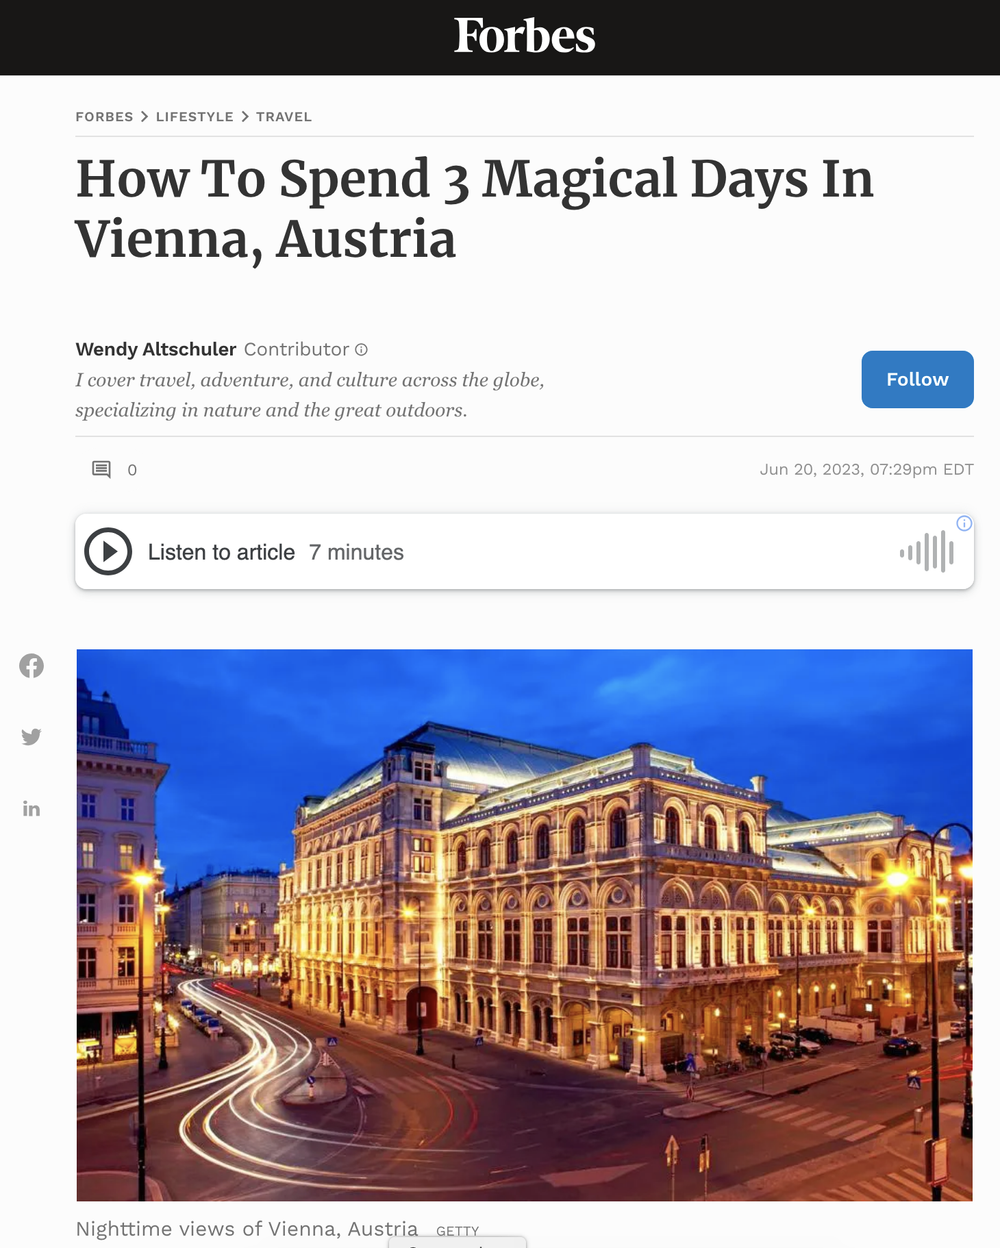 How To Spend 3 Magical Days In Vienna, Austria